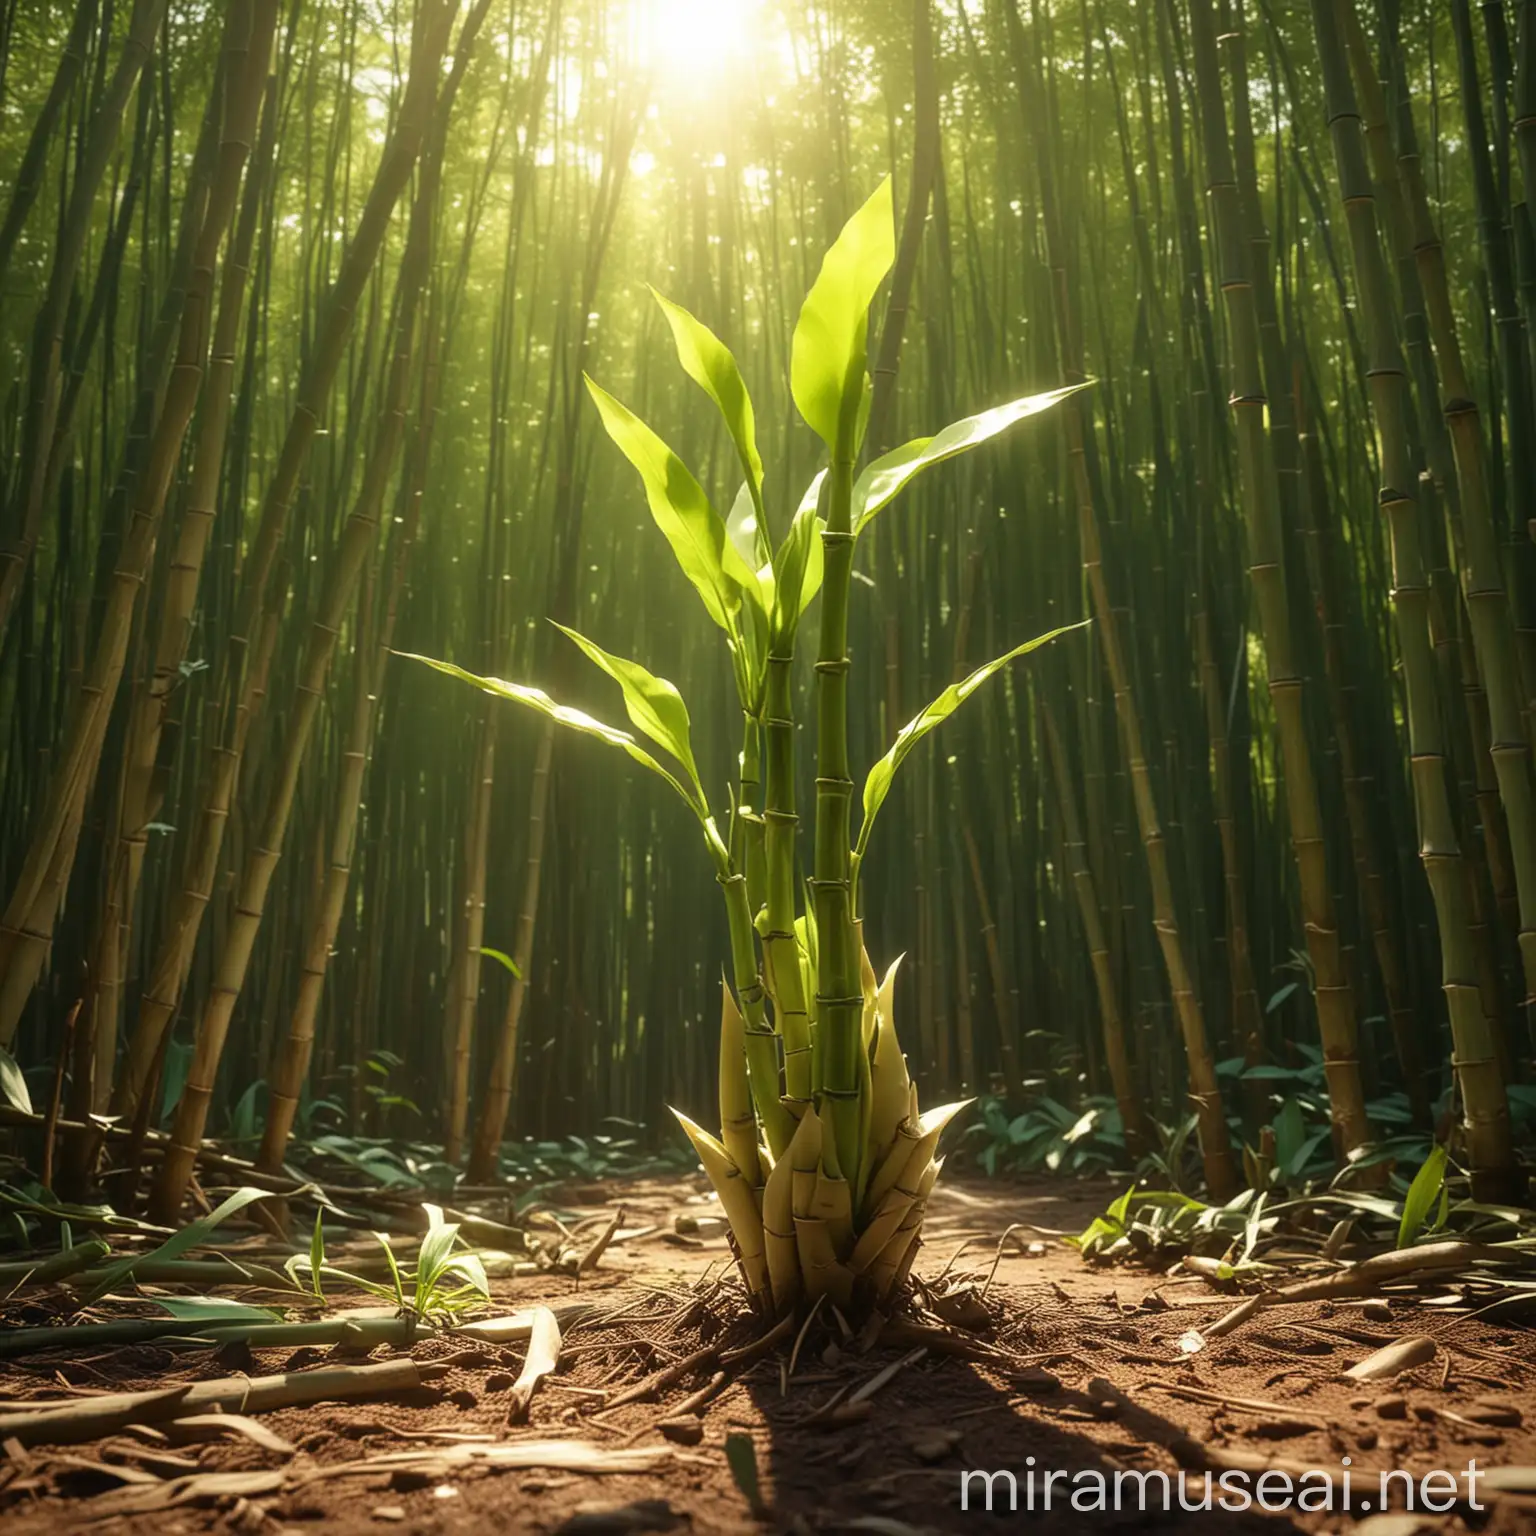 Bamboo Shoot Growing Under the Sun in Pixar Style